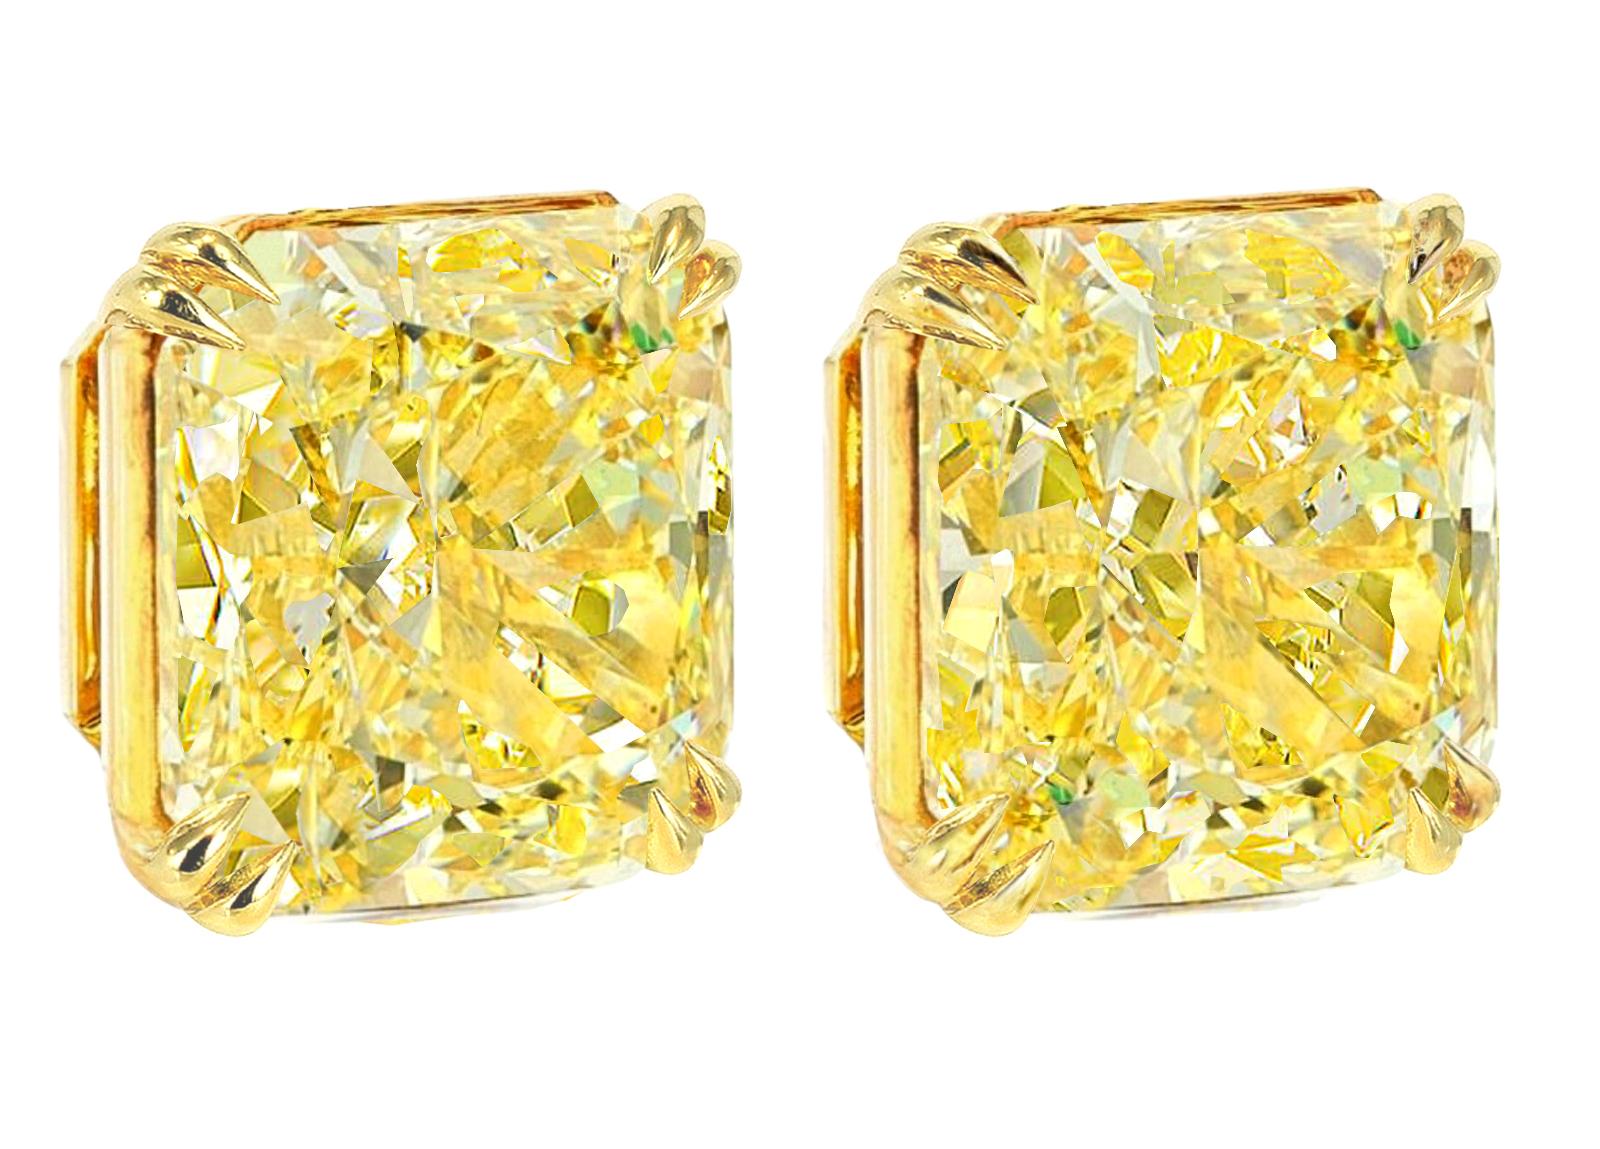 Contemporary GIA Certified Fancy Yellow 6.63 Carat Radiant Cut Diamond Studs For Sale